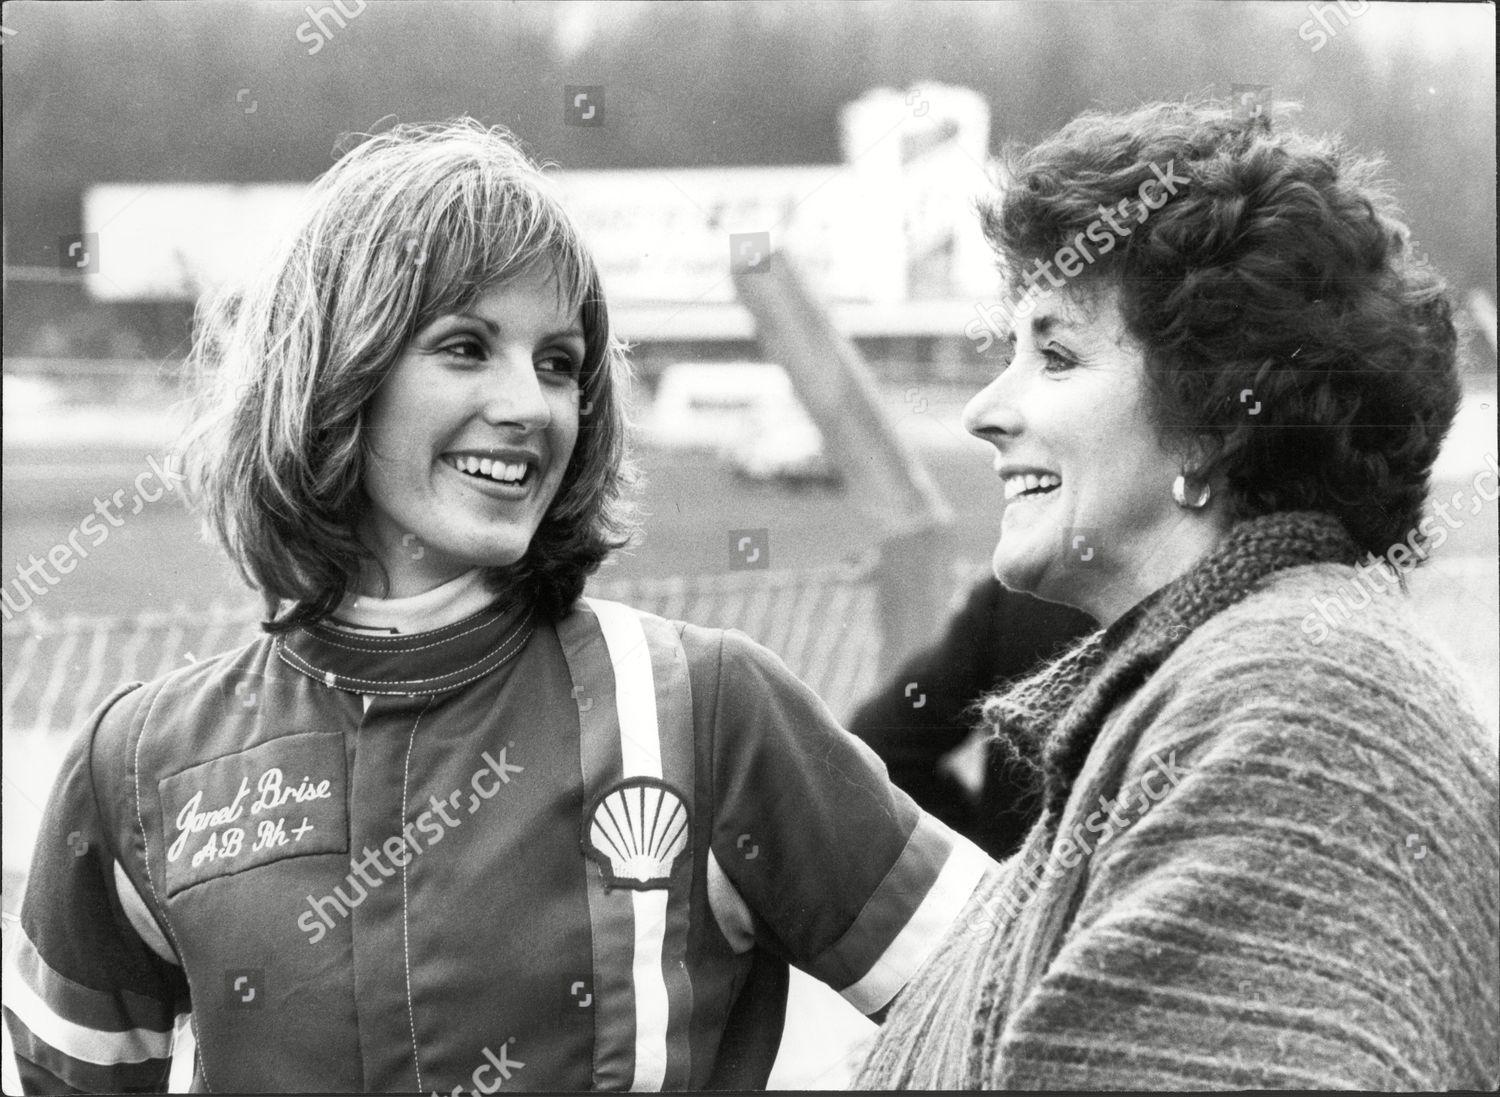 Bette Hill and Janet Brise at Silverstone.